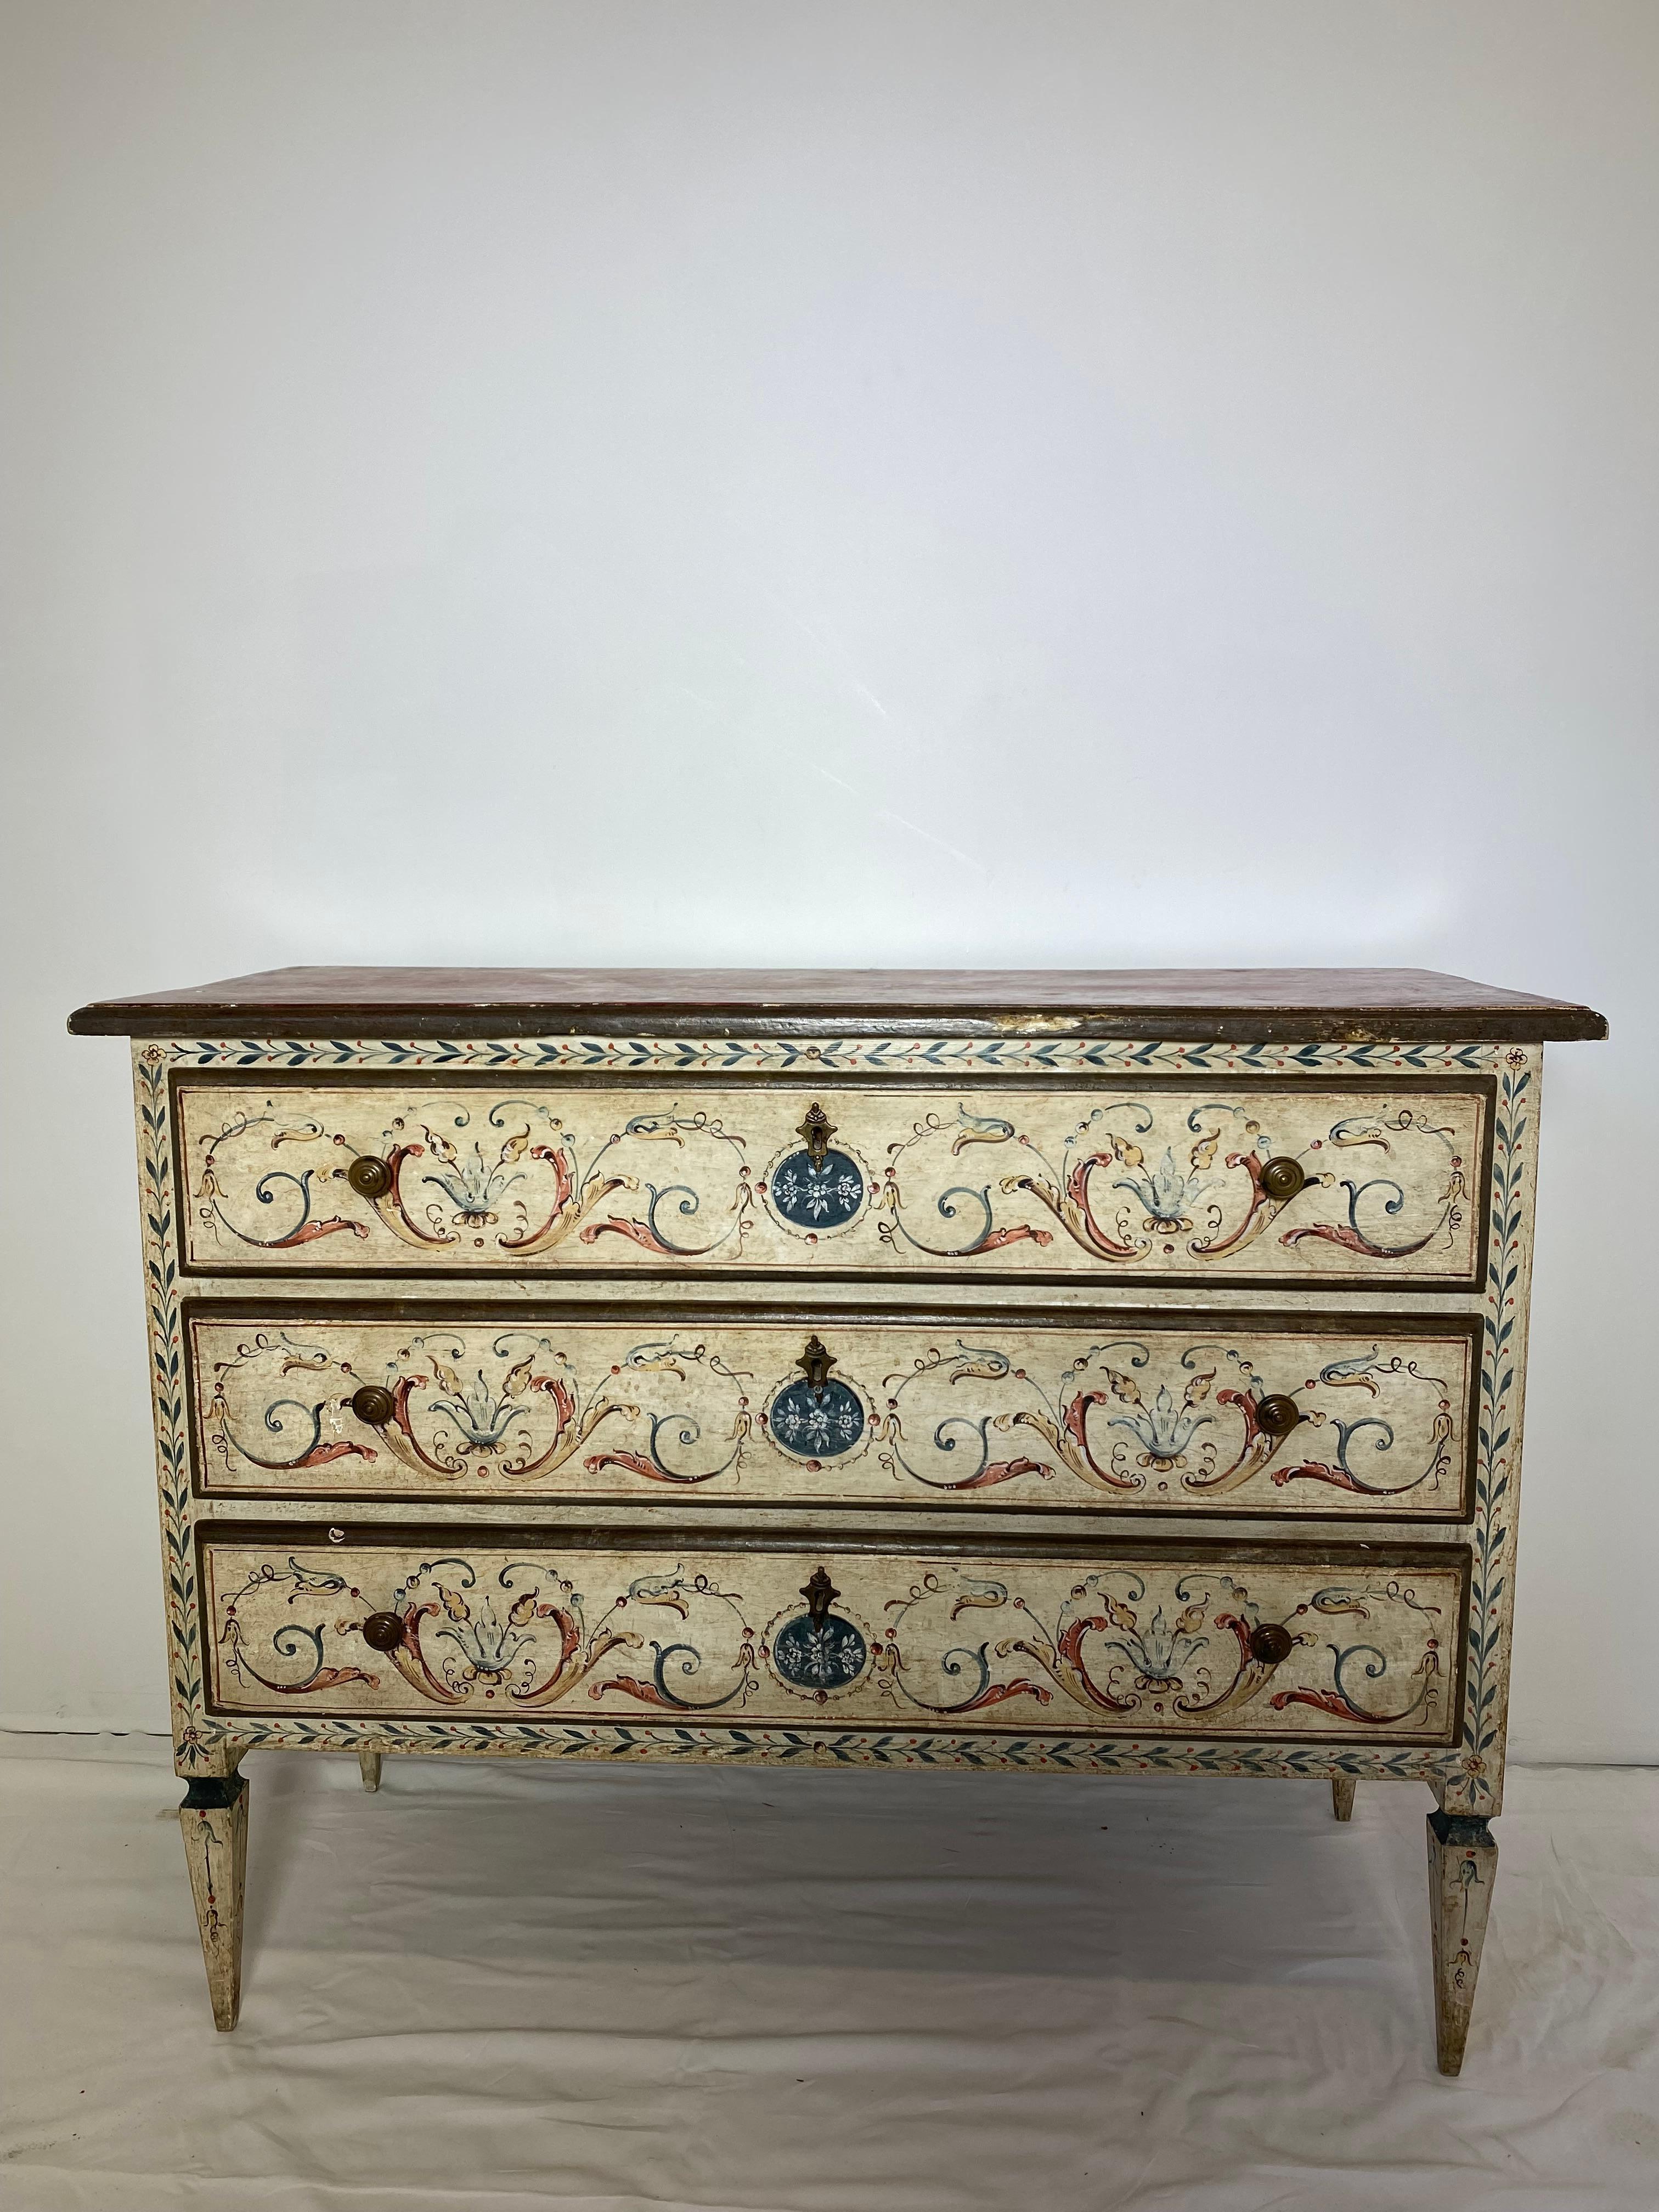 19th century painted Italian commode. An Italian polychrome faux-marble top neoclassic commode 19th century the faux-marble top above three drawers all resting on tapering legs. Decorated throughout with great detail.